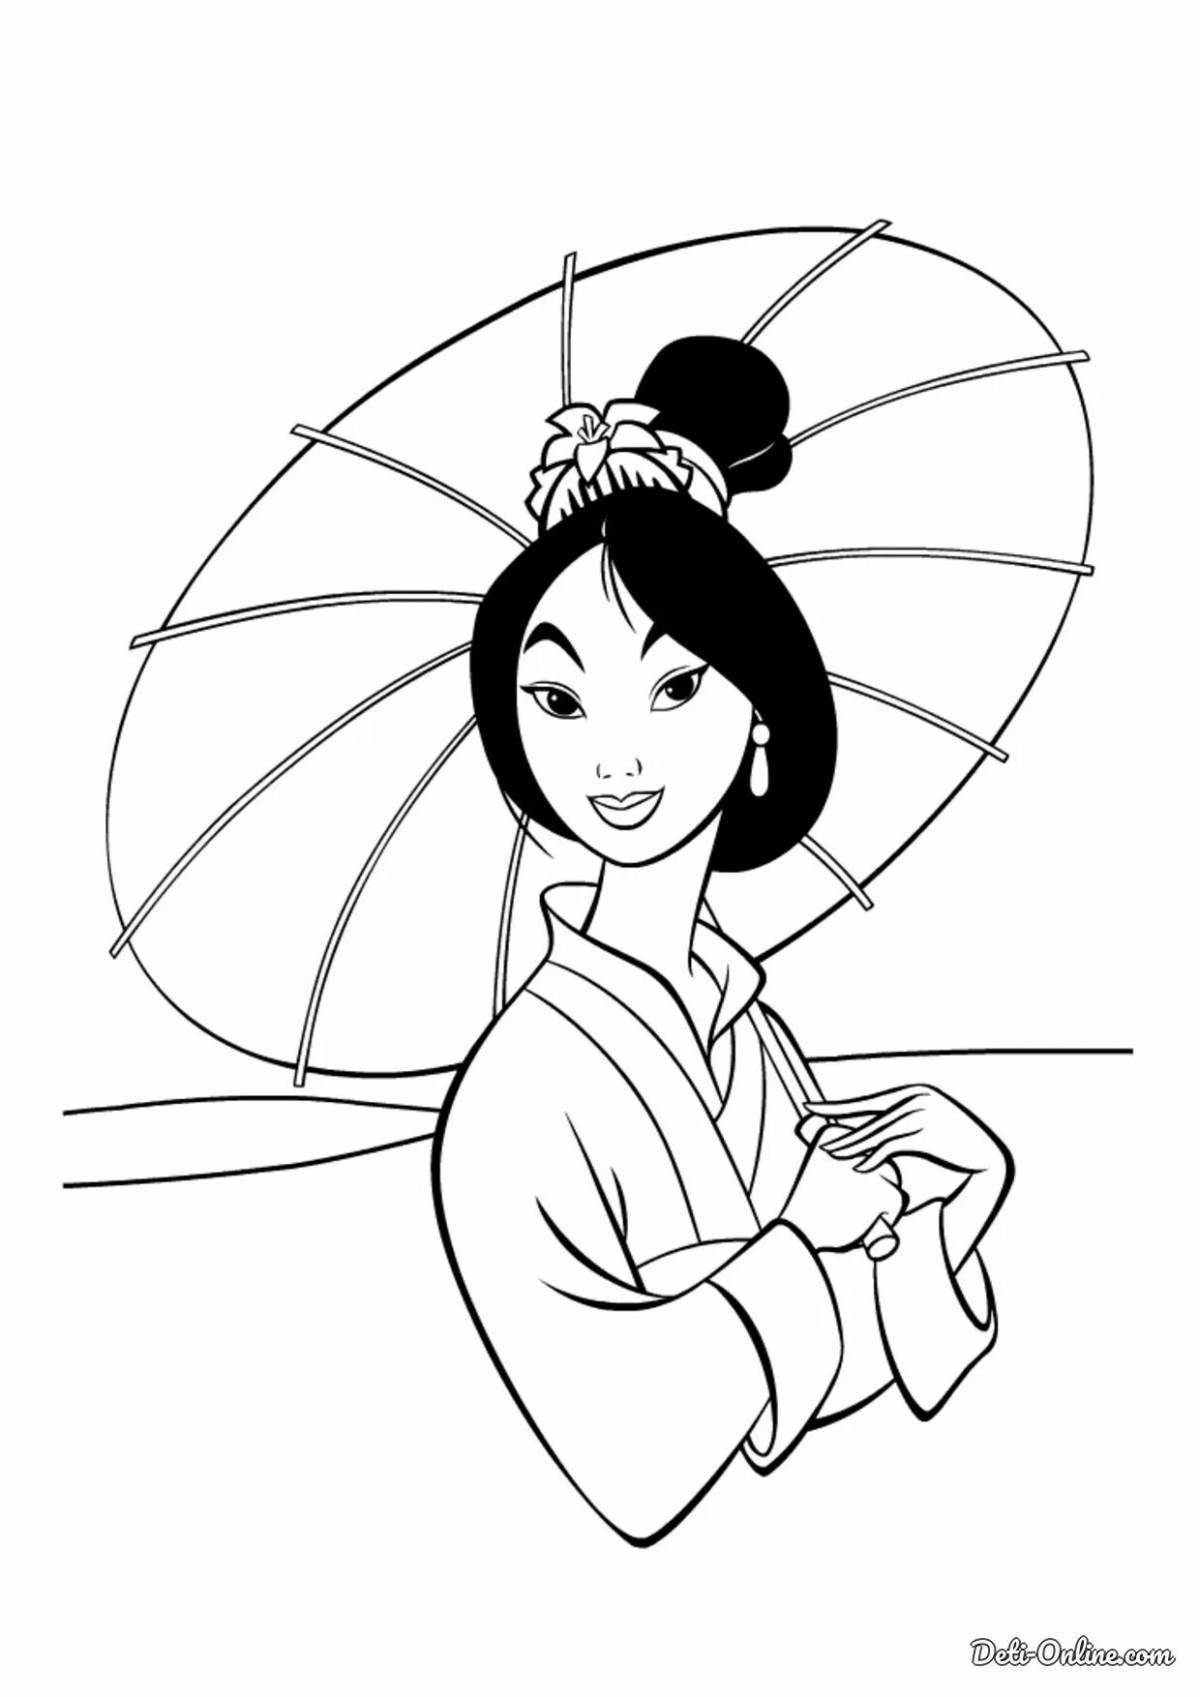 Chinese woman coloring page